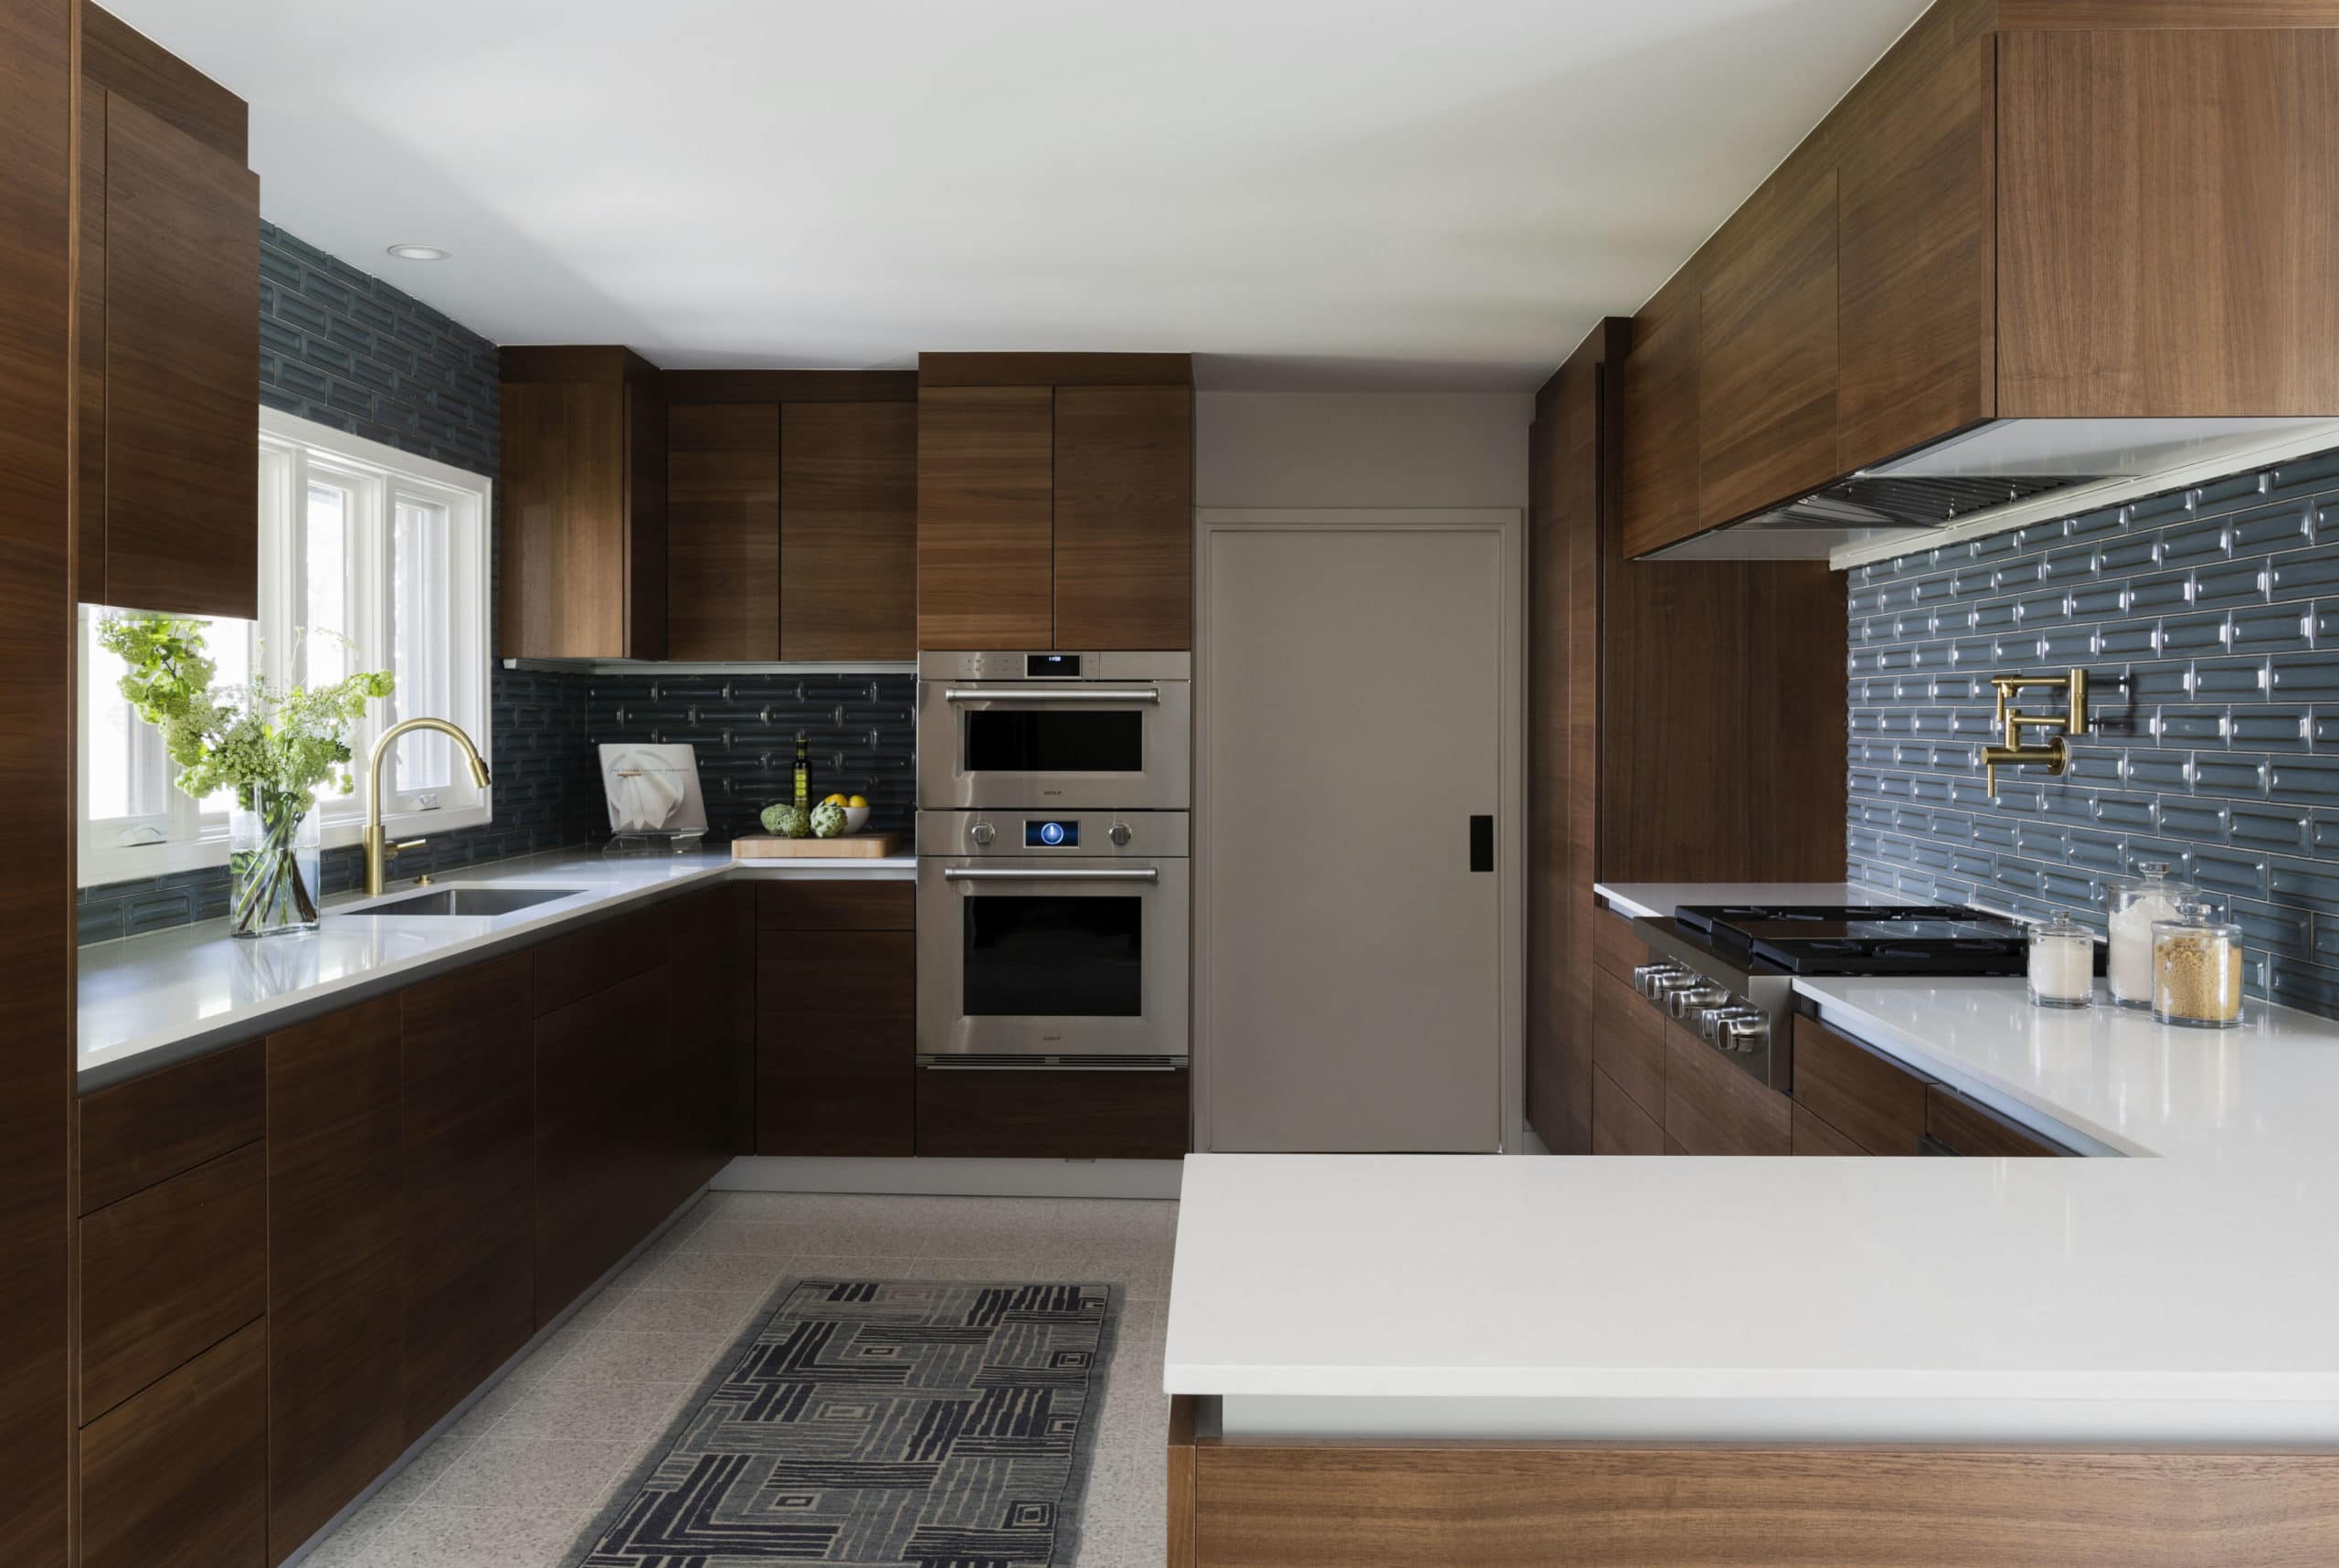 A gorgeous midcentury modern color palette includes deep blues, walnut woods and crips black and white